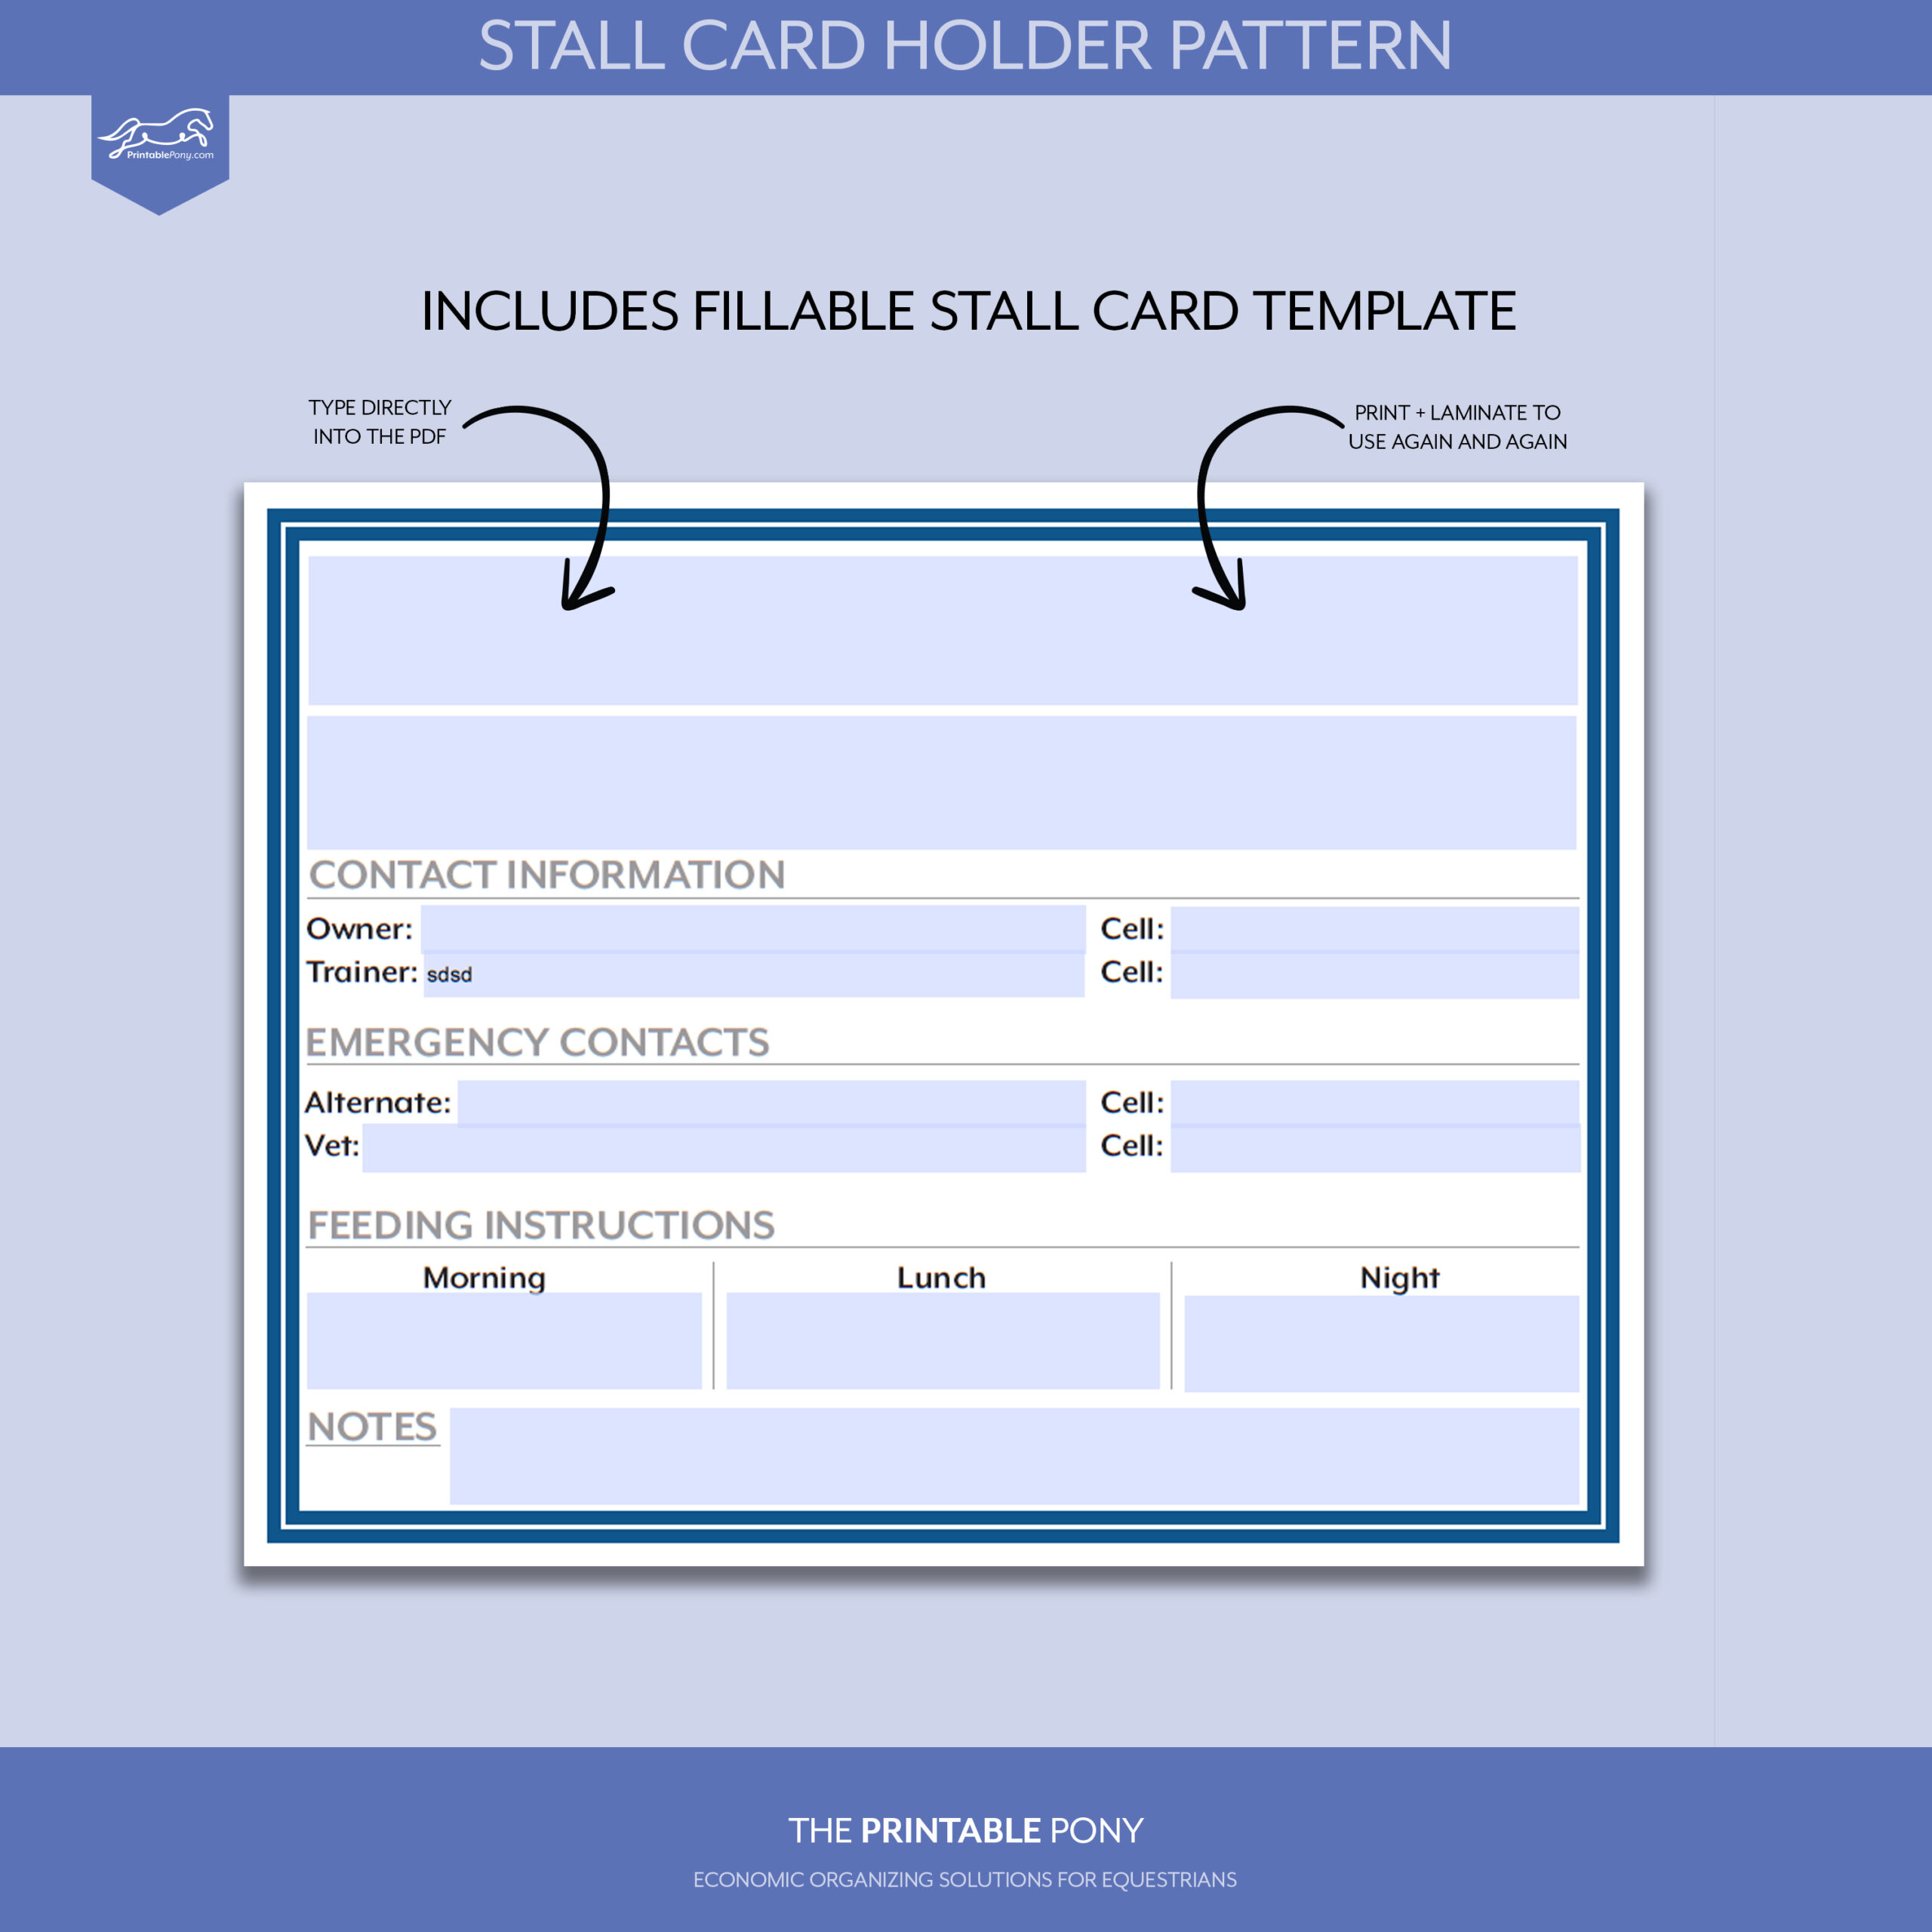 Stall Card Holder Pattern + Printable Stall Card Within Horse Stall Card Template